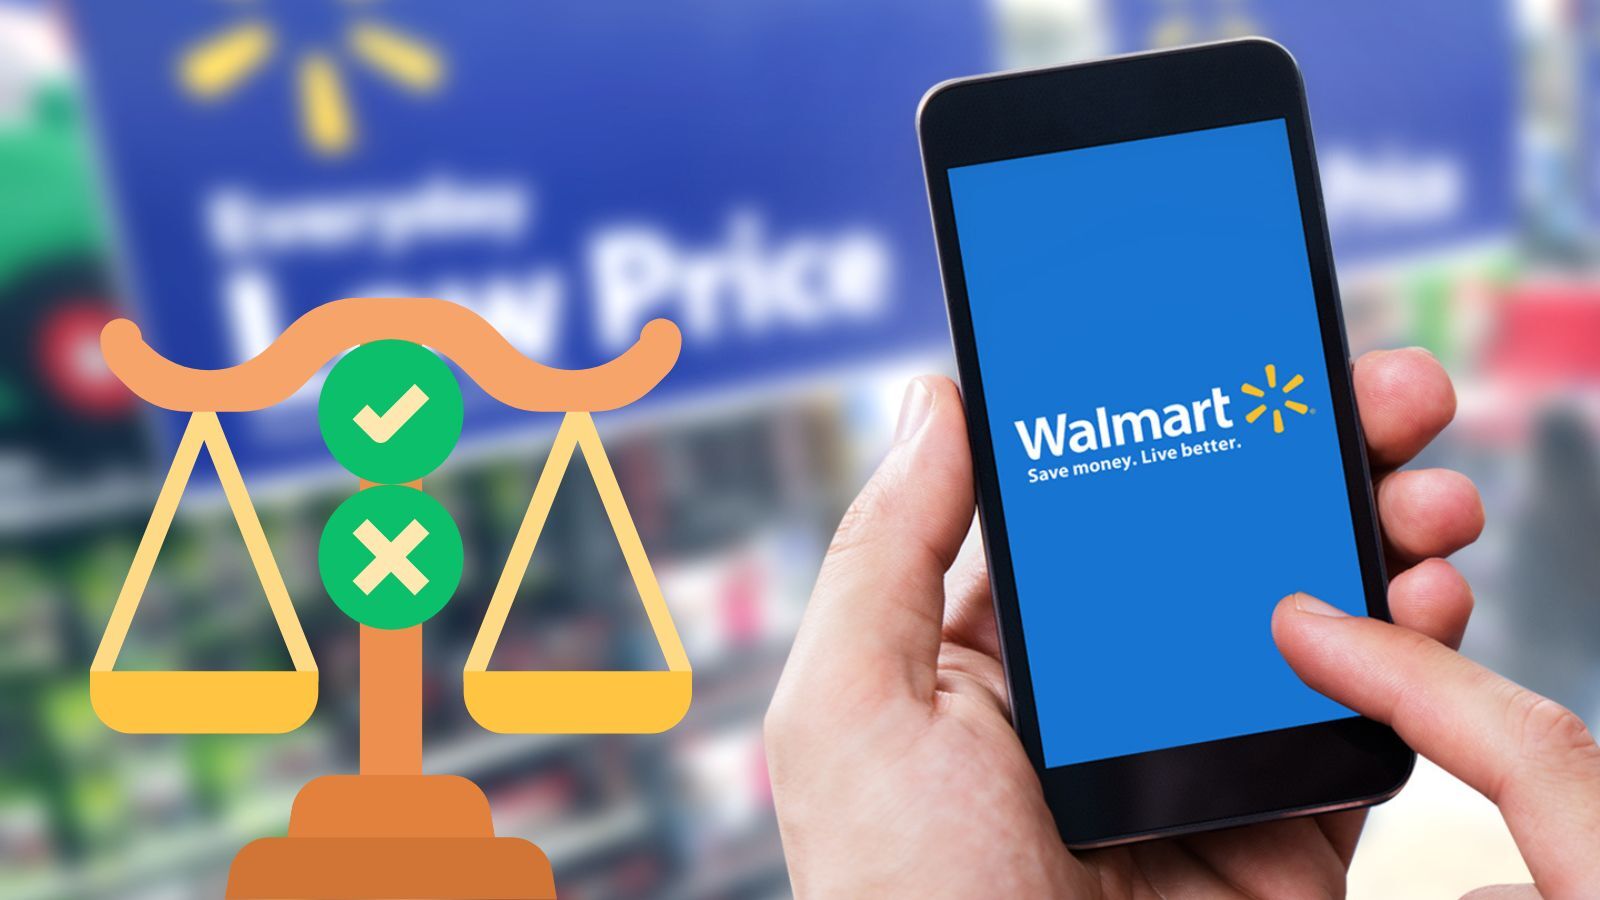 Is Walmart Ethical? (Exploring Employees, Products, and More)